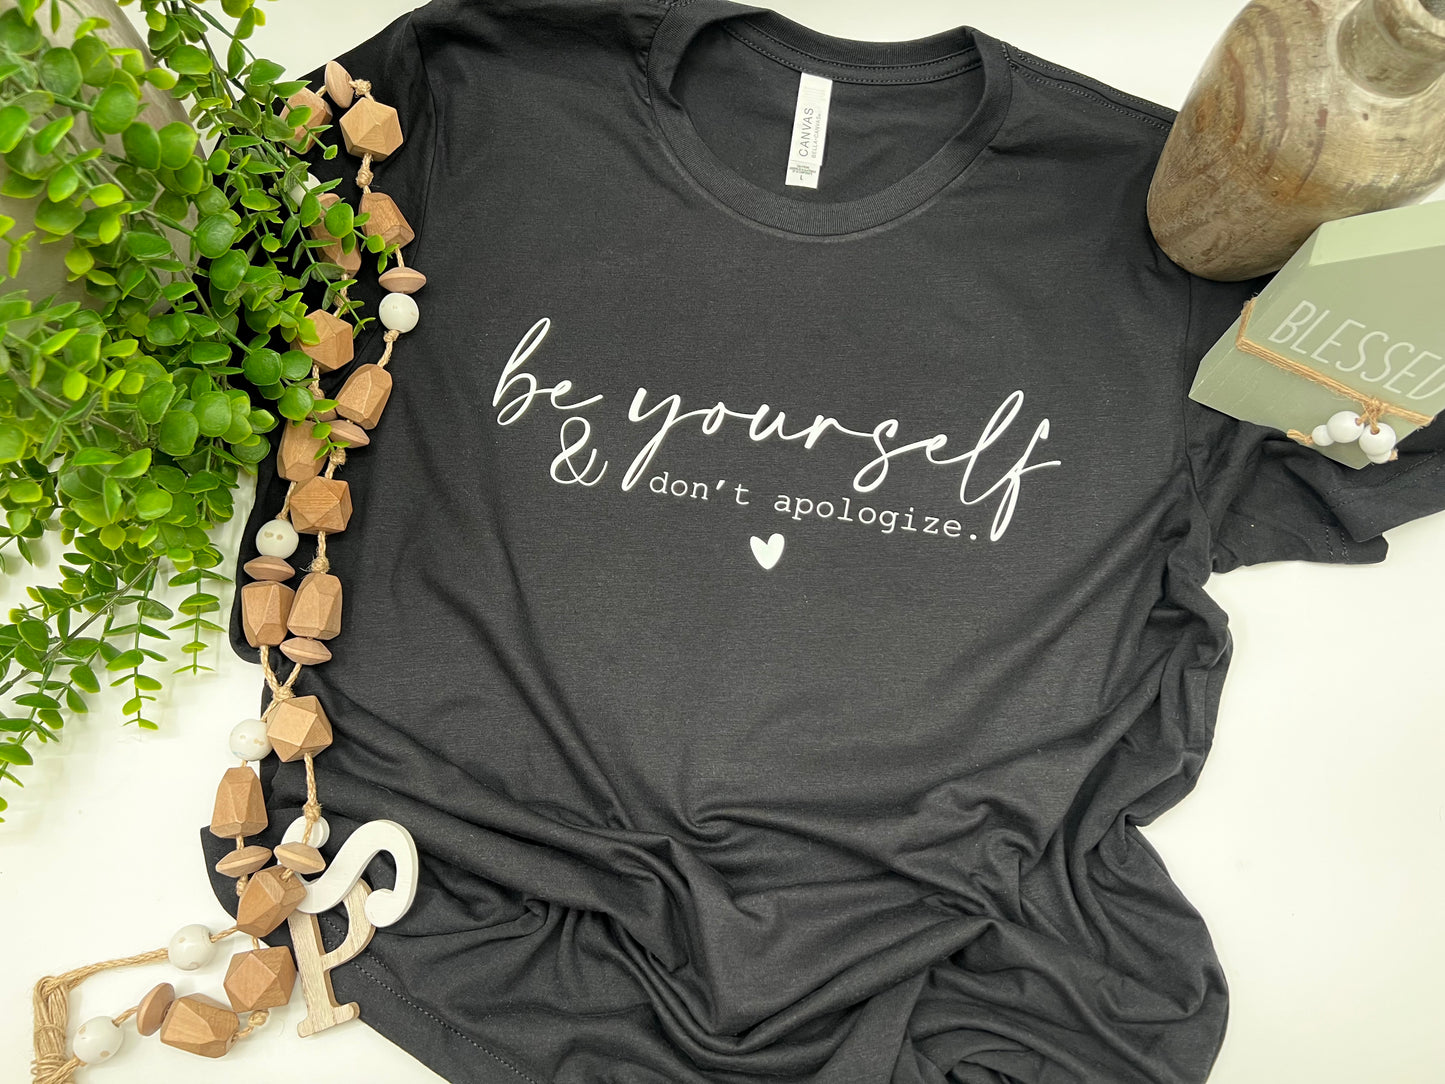 Be Yourself & Don’t Apologize - Black Tee